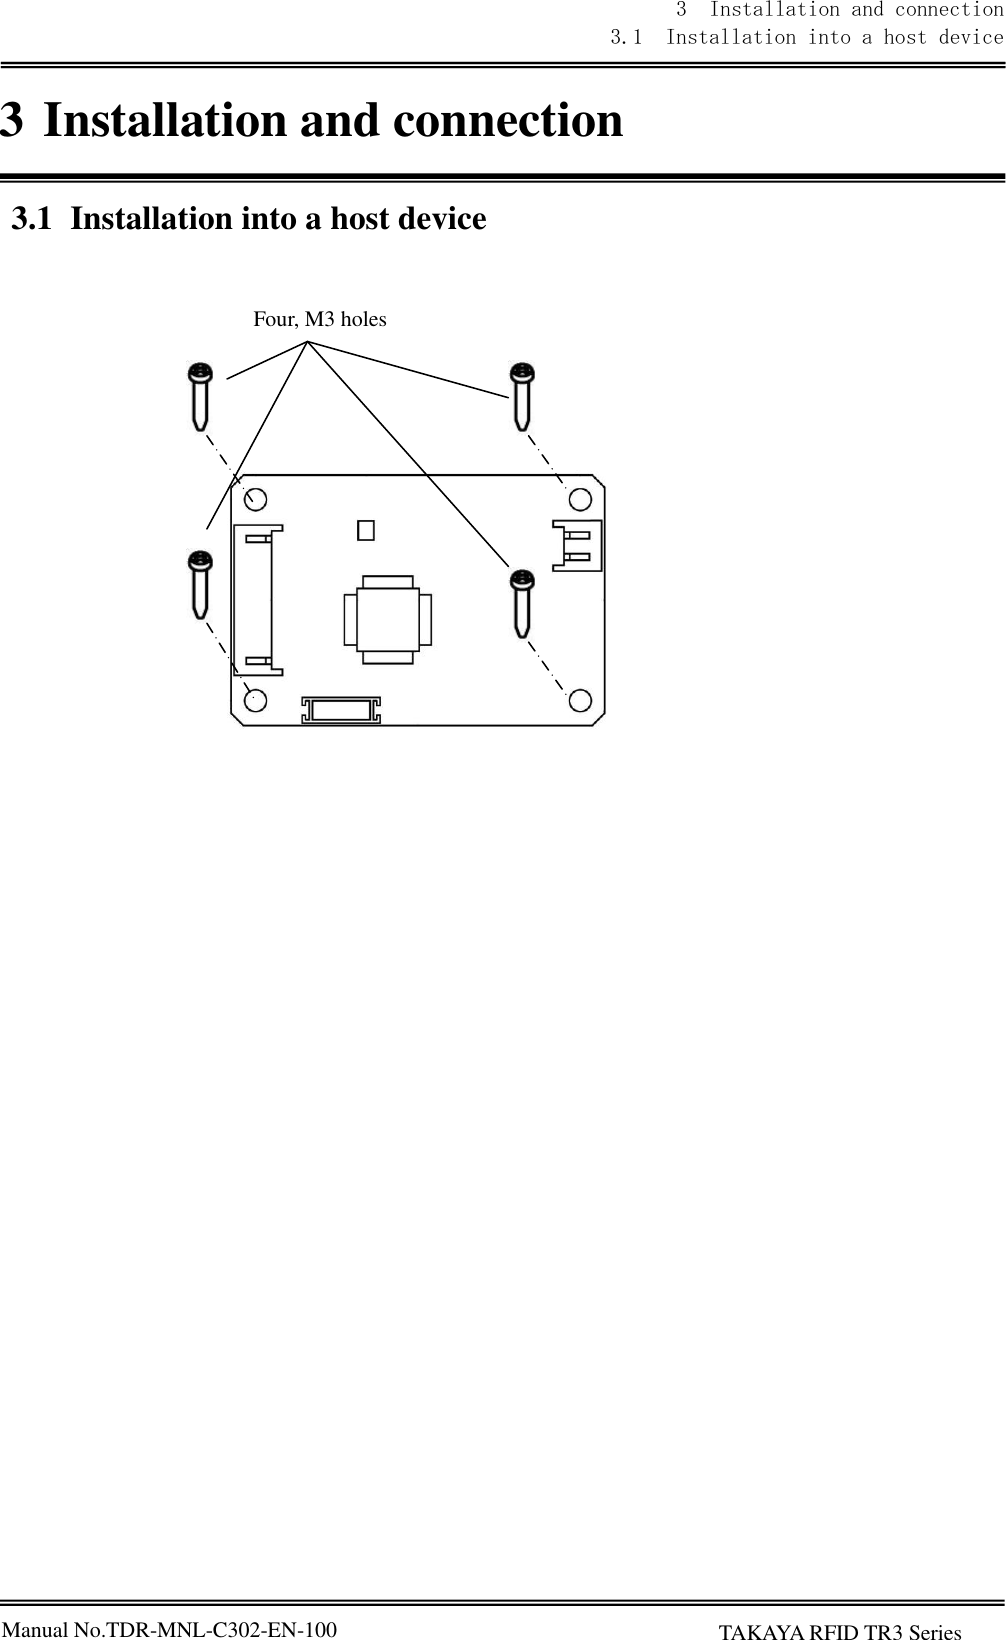 Manual No.TDR-MNL-C302-EN-100 3  Installation and connection 3.1  Installation into a host device      TAKAYA RFID TR3 Series  3 Installation and connection   3.1 Installation into a host device                         Four, M3 holes 